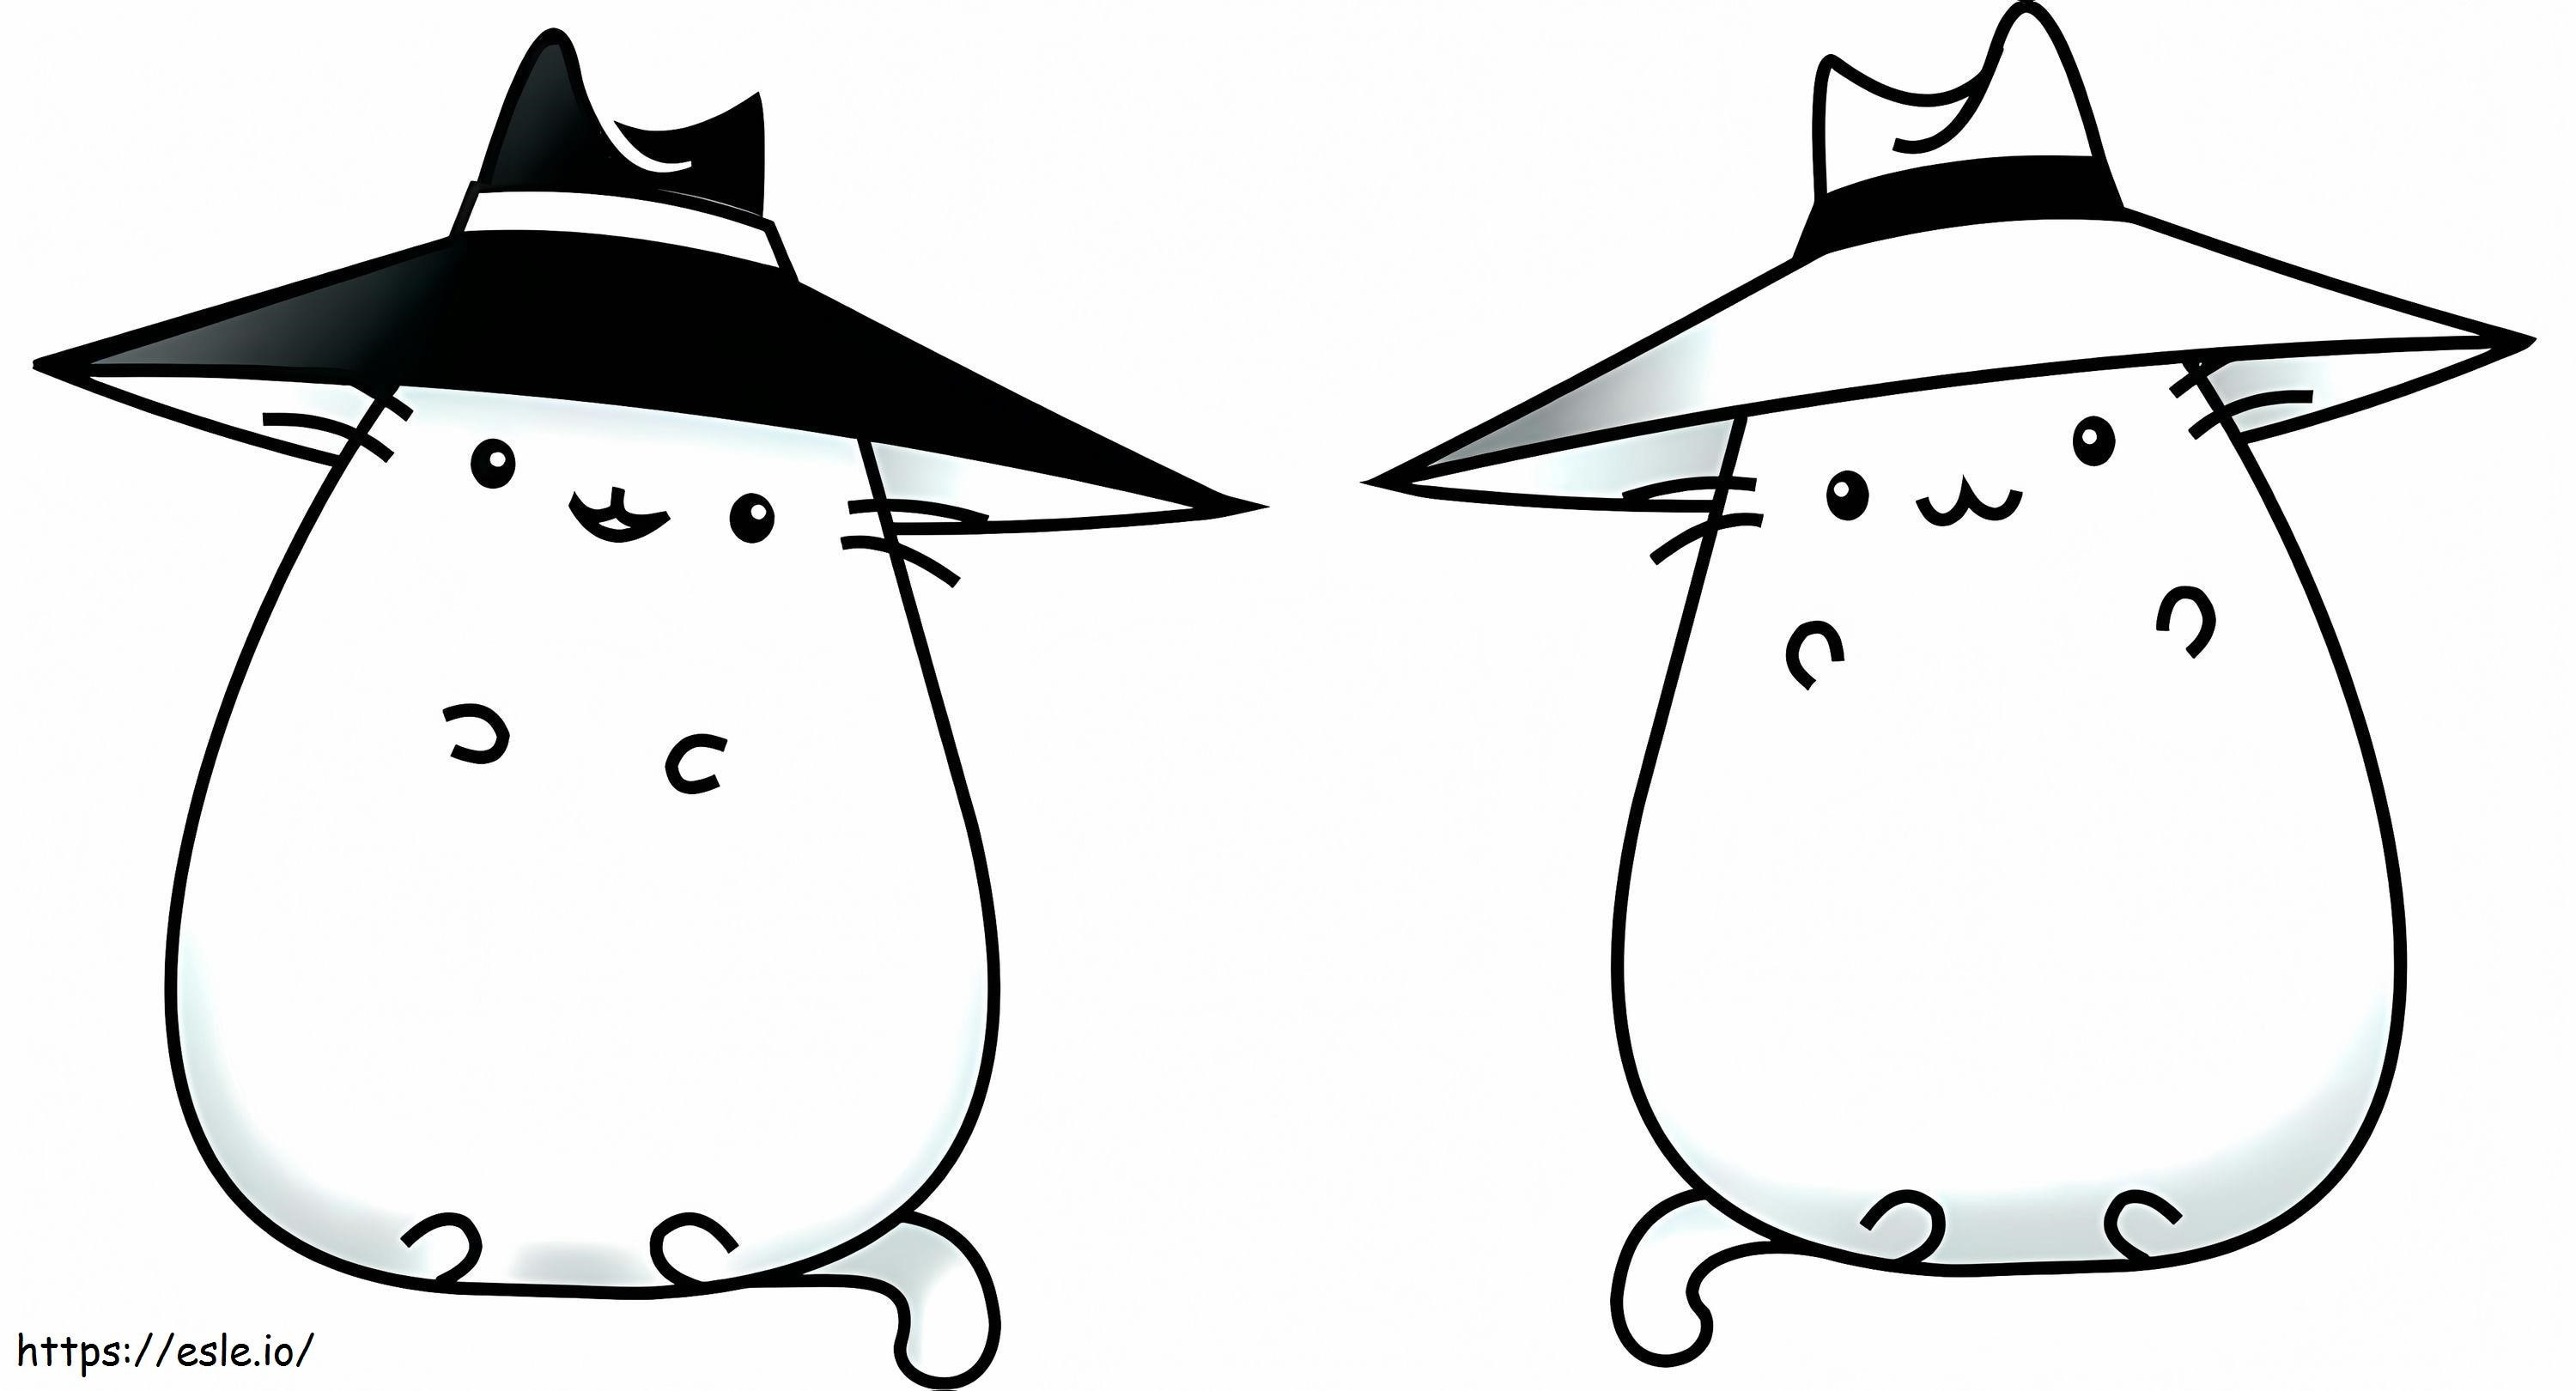 Pusheen Cat For The Cat Together With Print A The Cat Pusheen The Cat Black And White coloring page